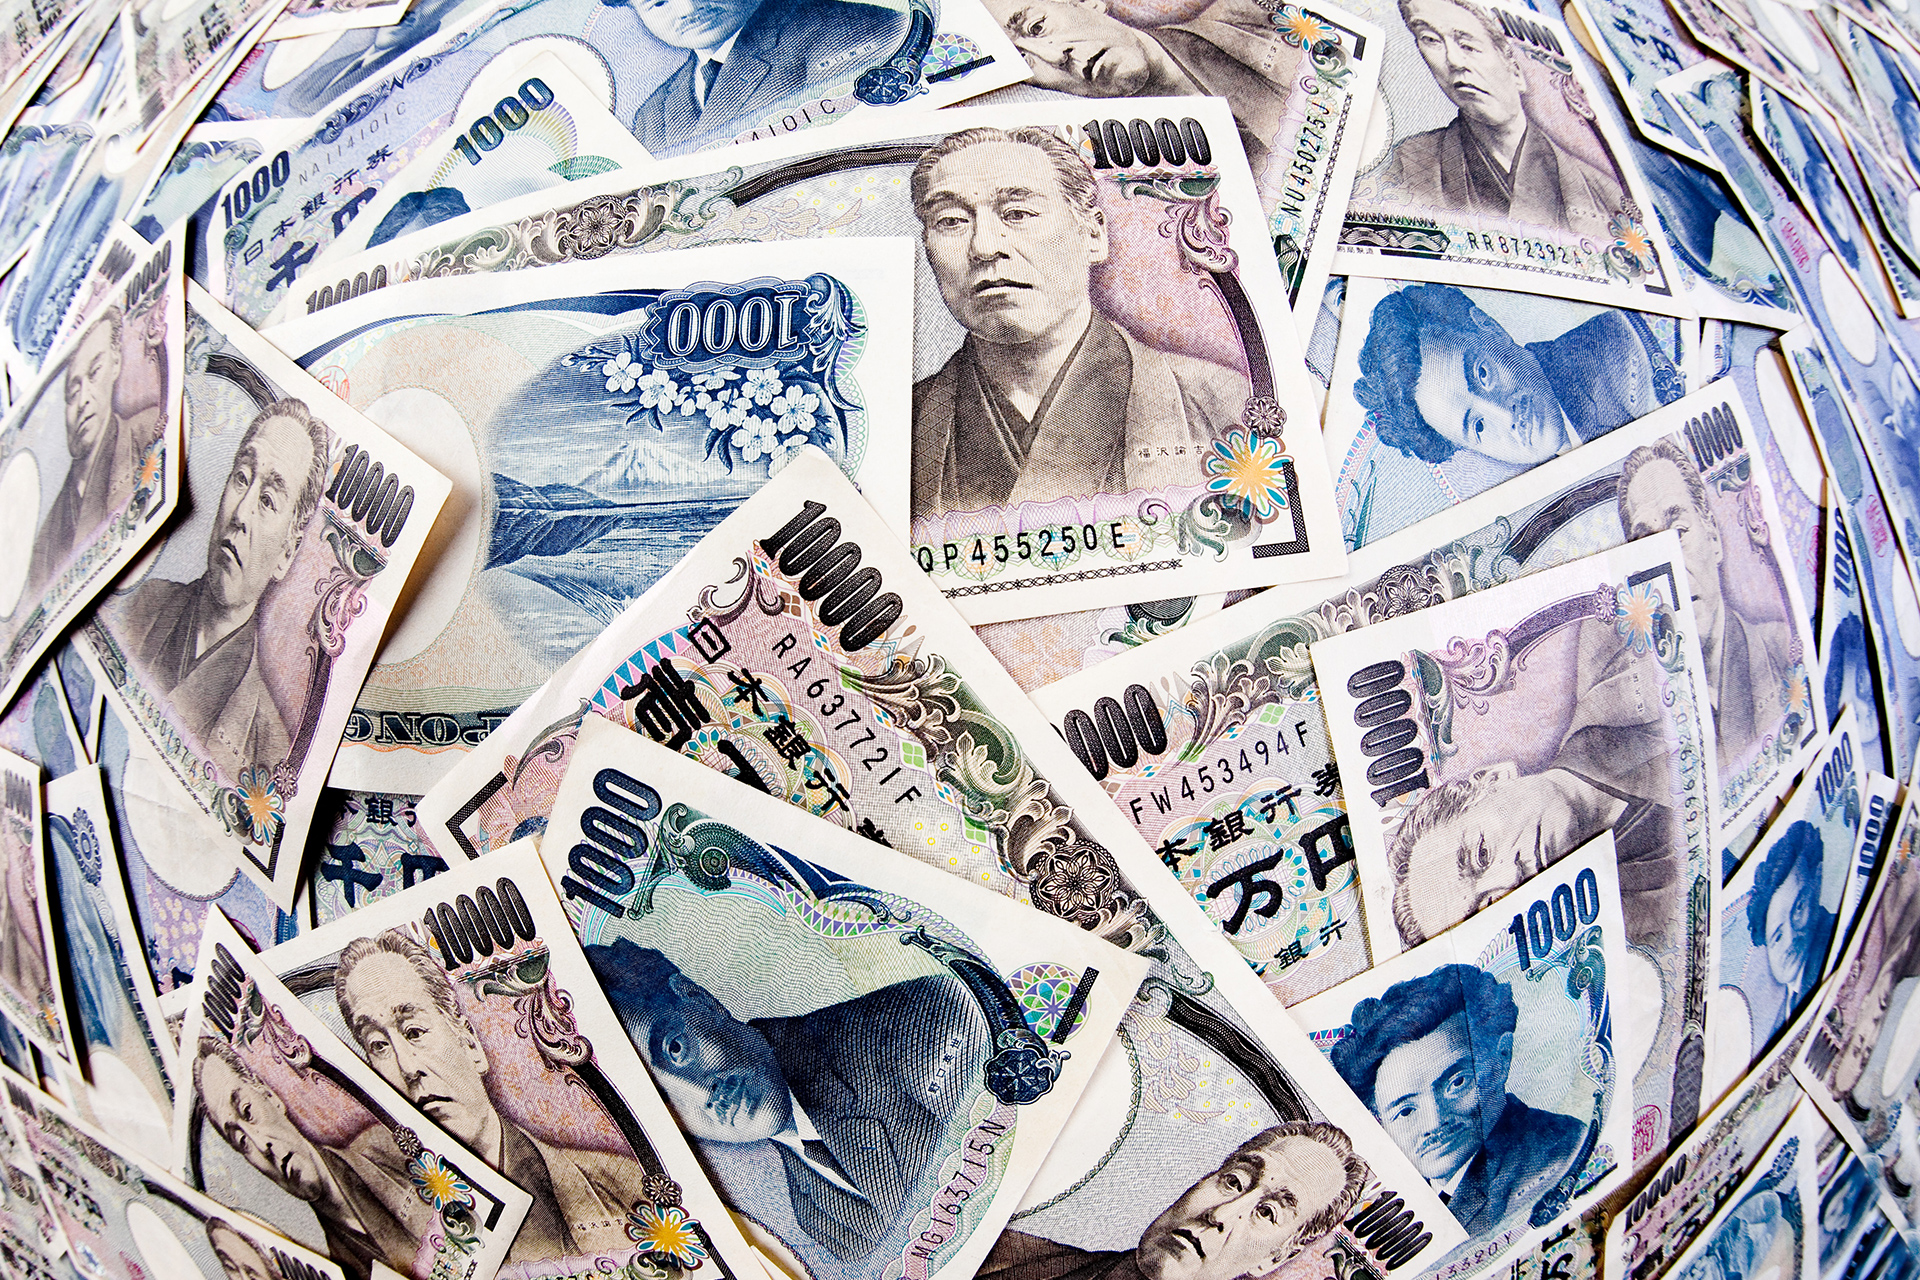 Running Point in the Press: Japan-China Tensions Create Pressure on the Yen